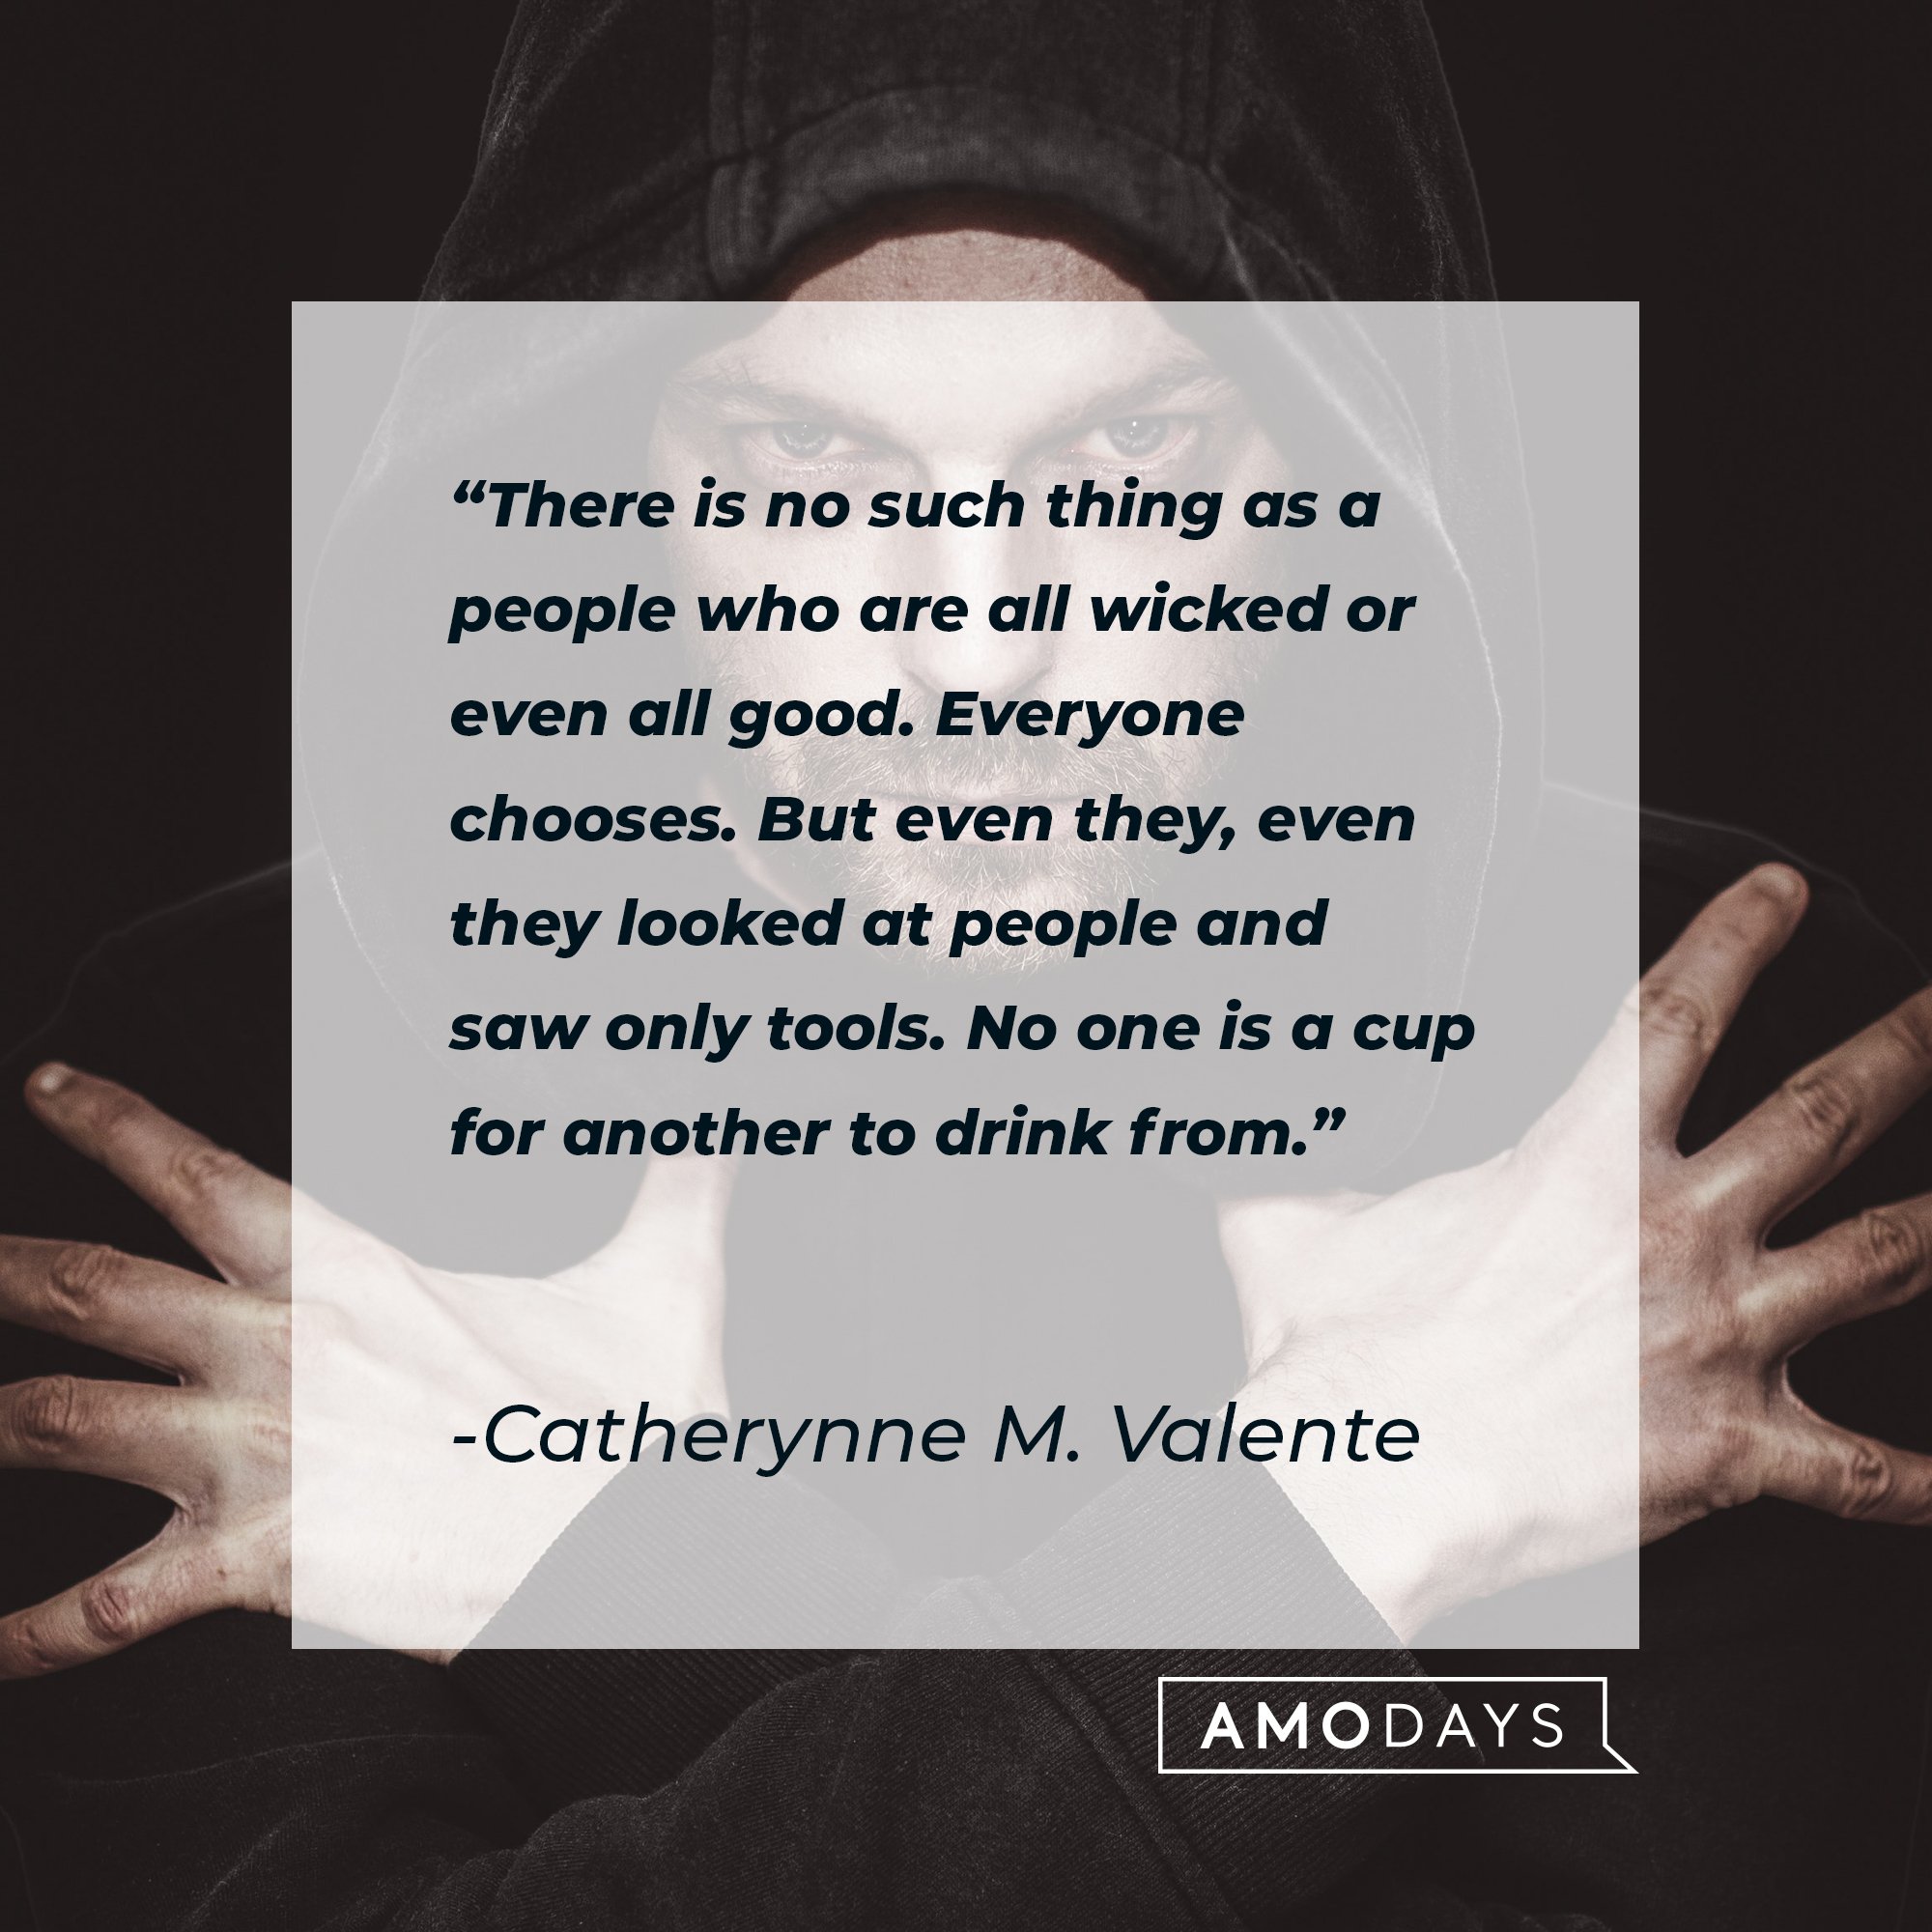 Catherynne M. Valente’s quote: "There is no such thing as a people who are all wicked or even all good. Everyone chooses. But even they, even they looked at people and saw only tools. No one is a cup for another to drink from." | Image: AmoDays